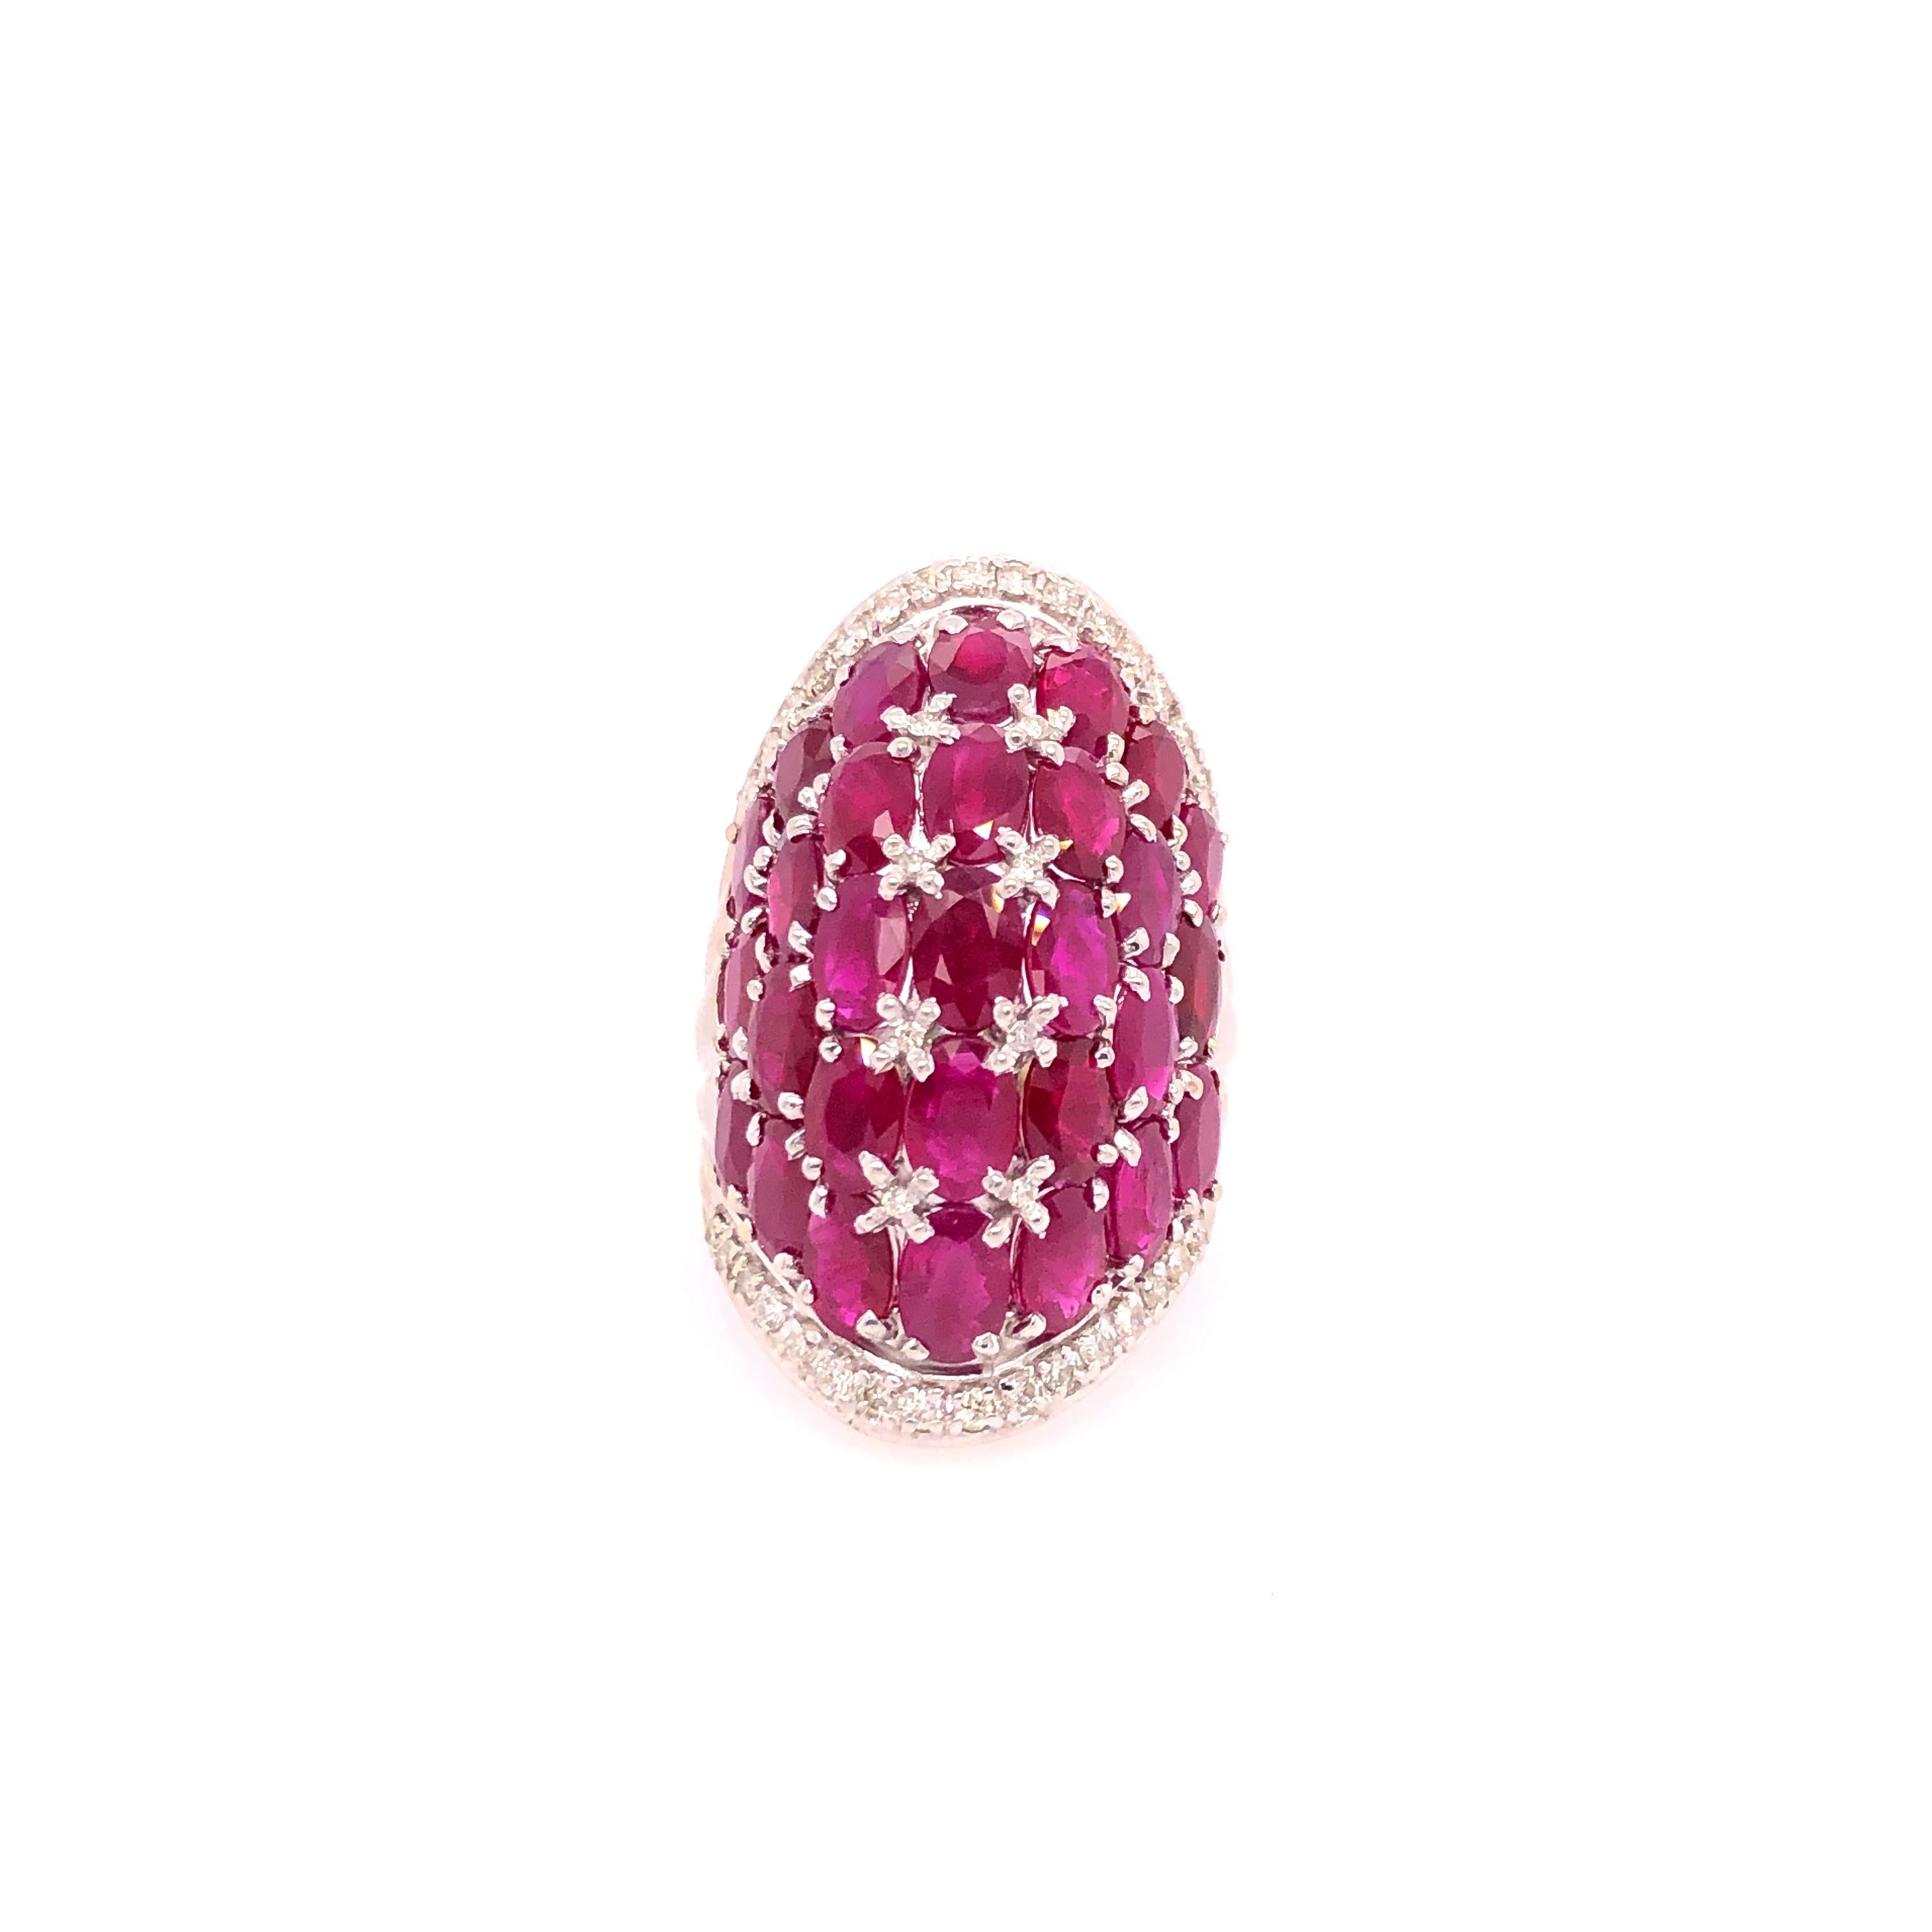 Elegant but bold this ruby and diamond knuckle ring is a show stopper! 29 oval rubies (each measuring about 6mm x 4mm) in 7 rows creates the bowed shape of of the ring. 8 small round diamonds accent the rubies while 32 round diamonds create a